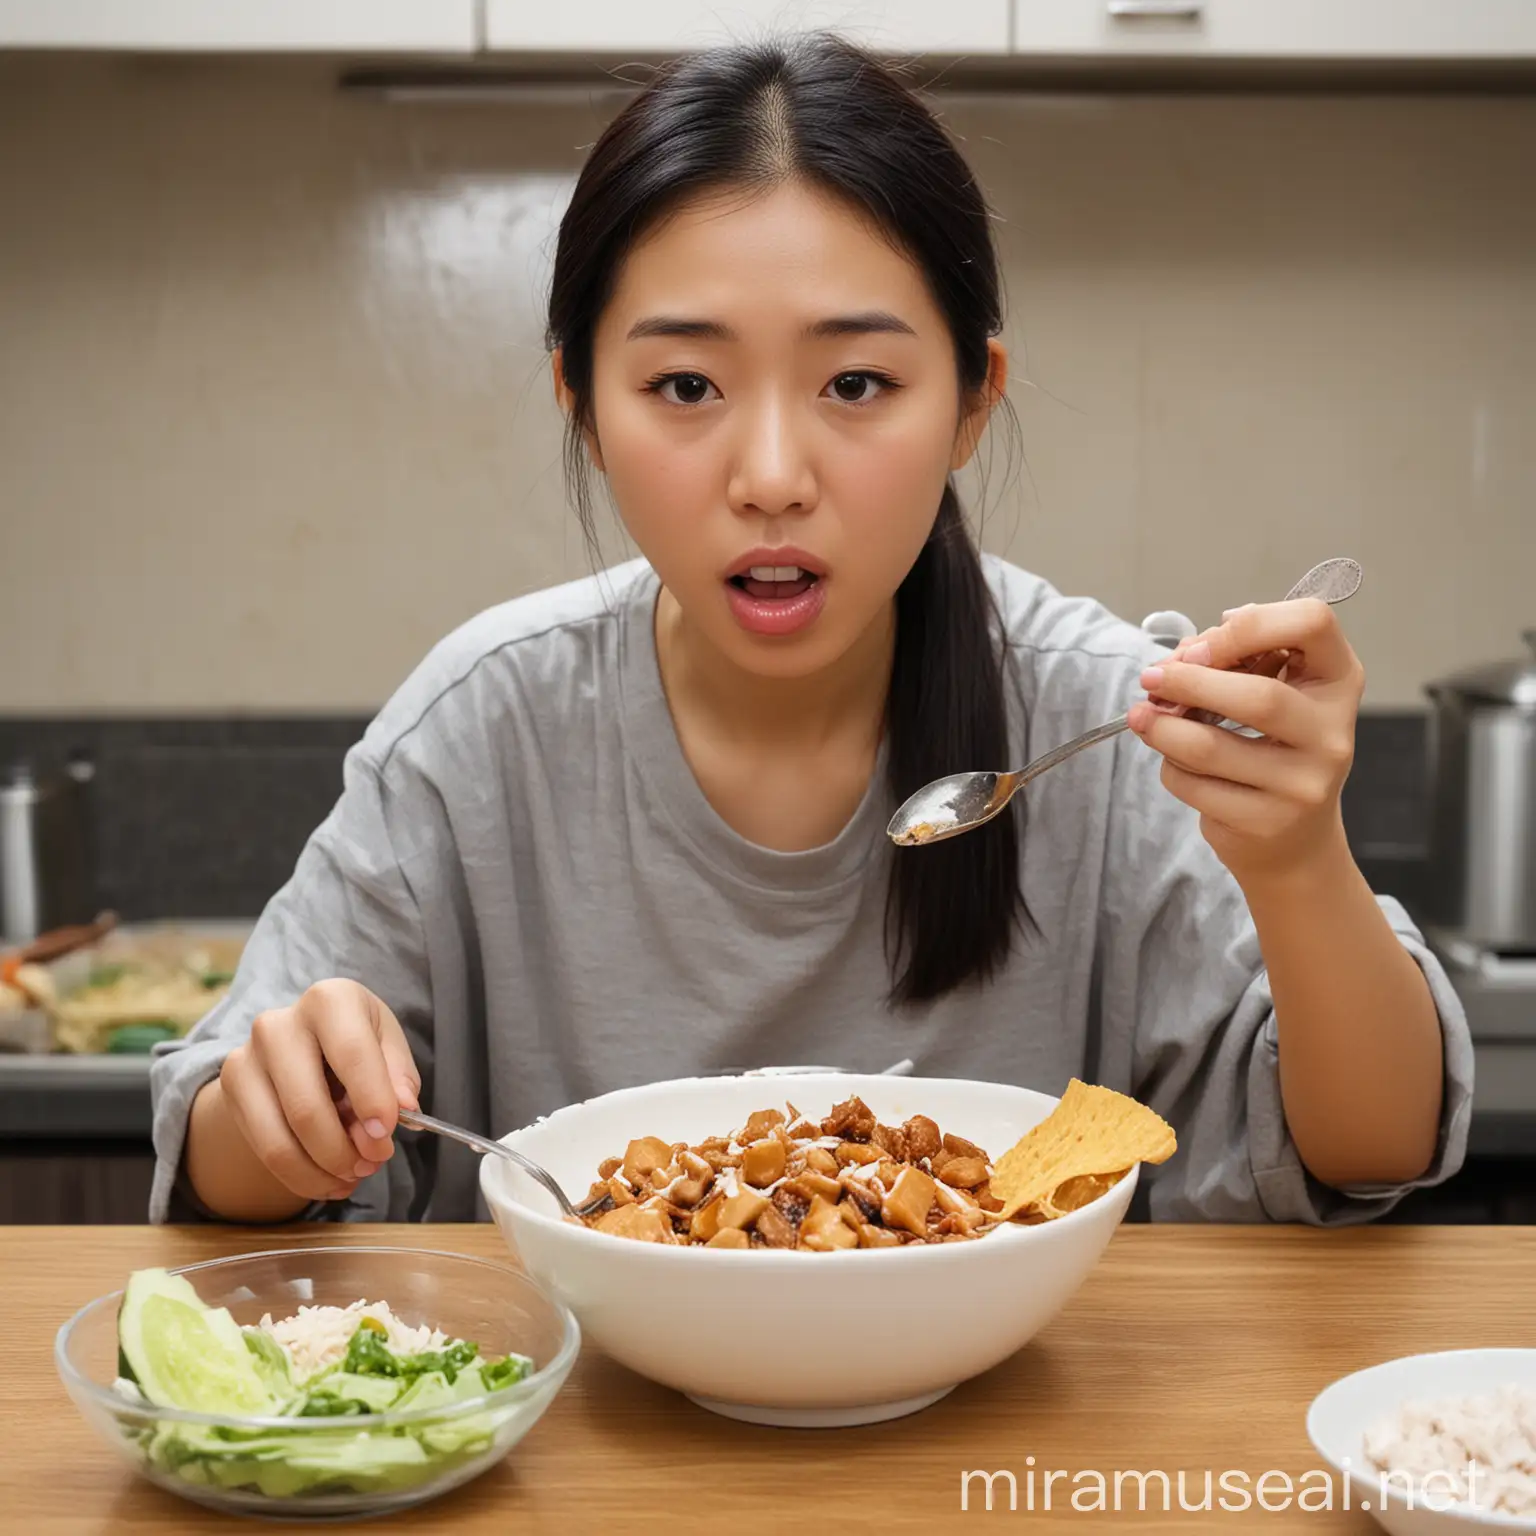 Asian Person Eating Salty Food with Spoon in Kitchen